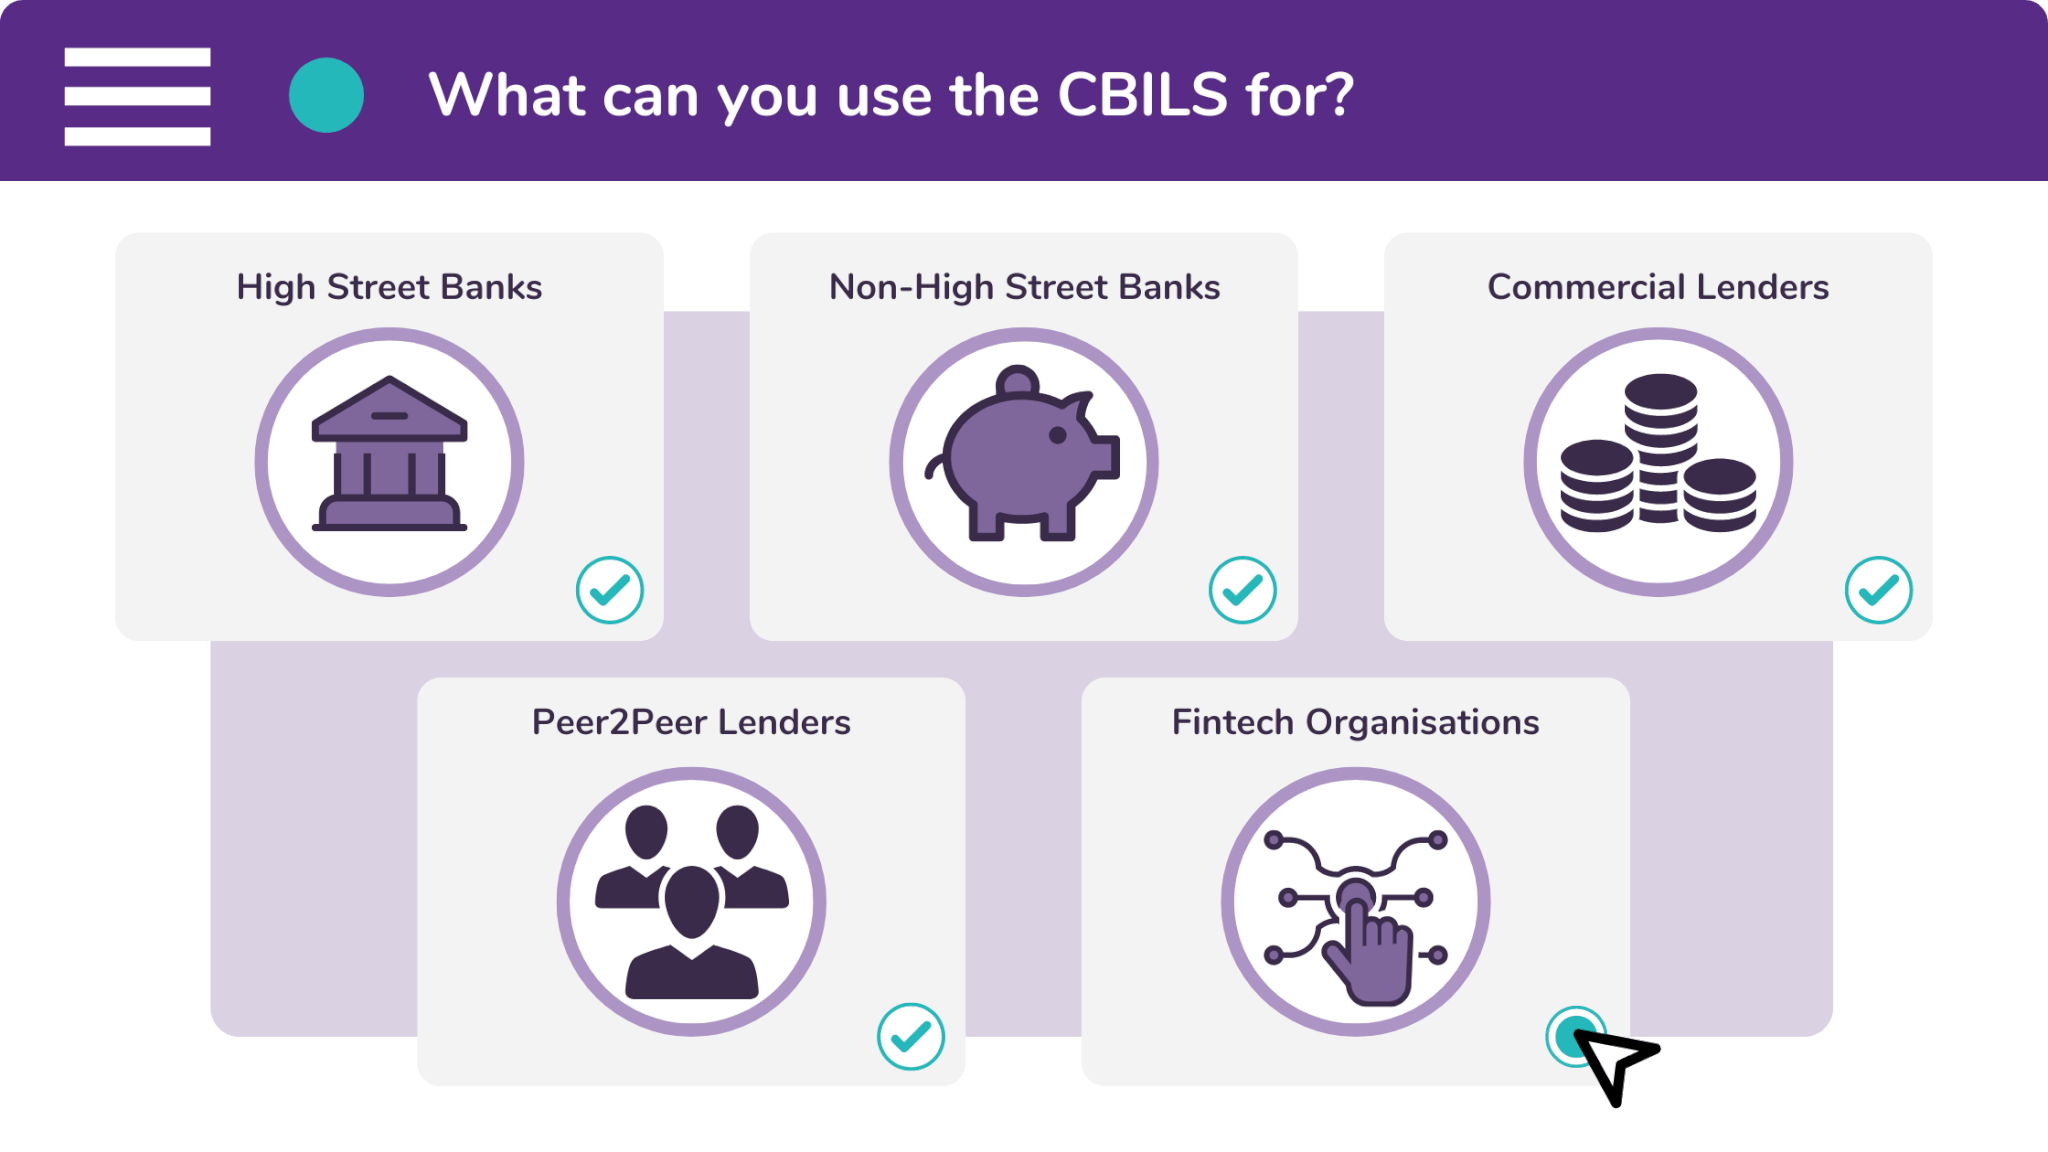 There are five sources from which you can borrow a CBILS loan.